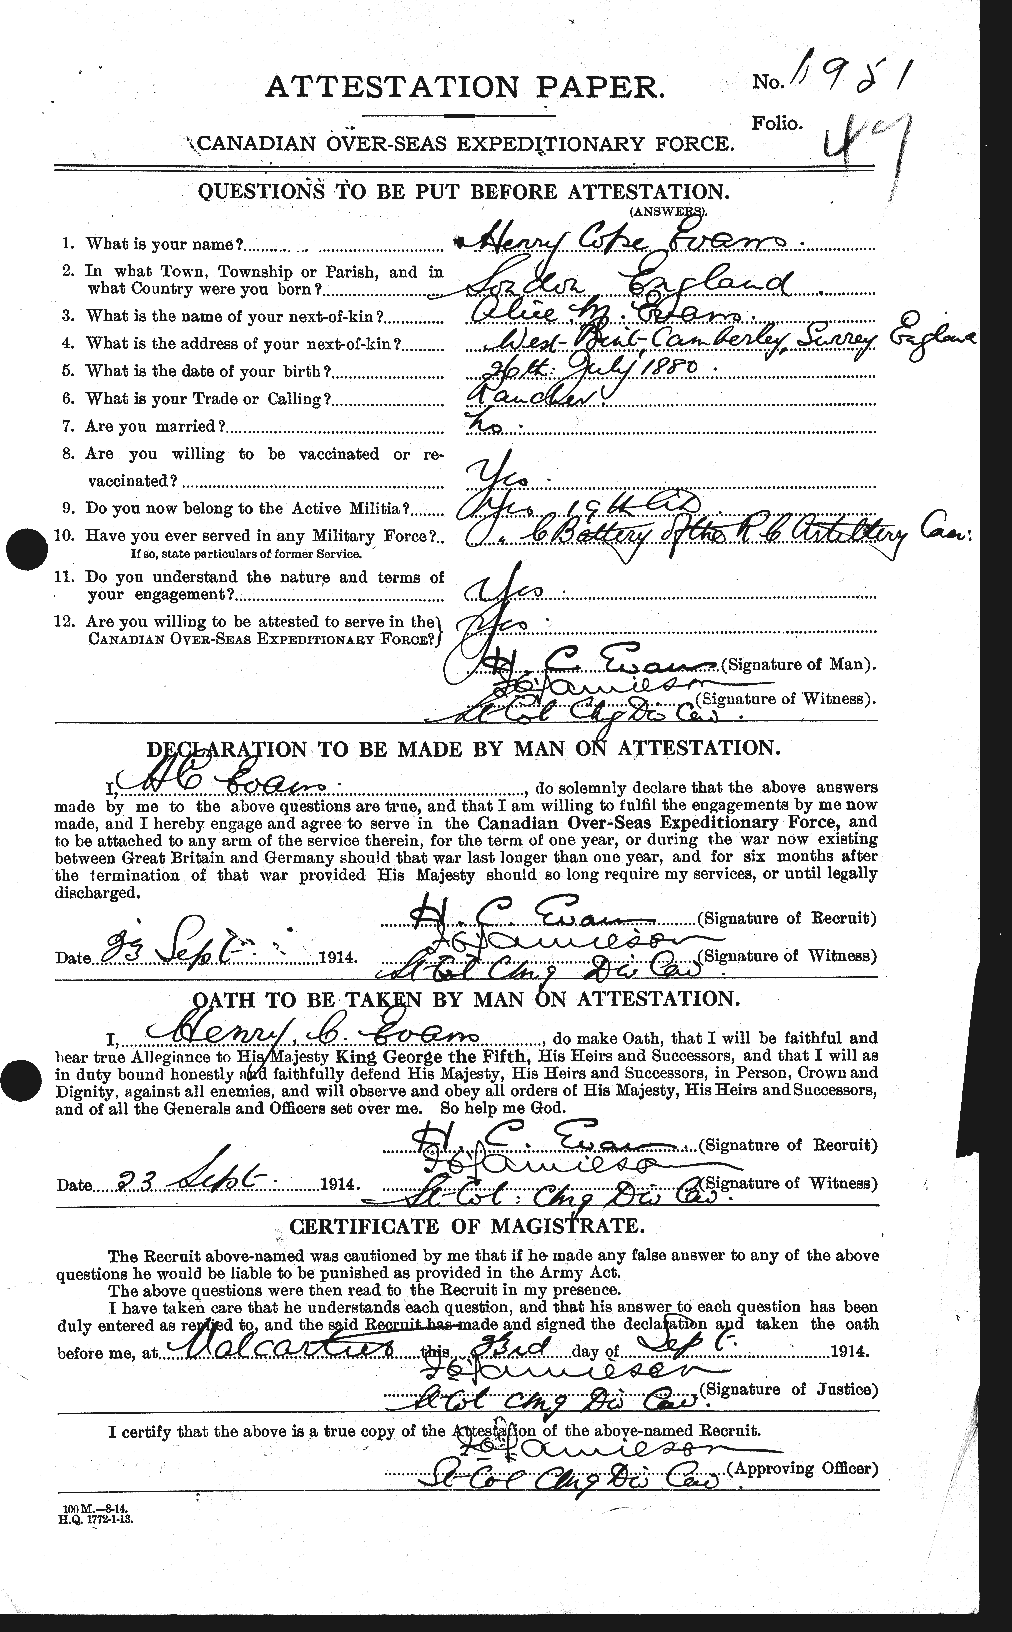 Personnel Records of the First World War - CEF 317713a